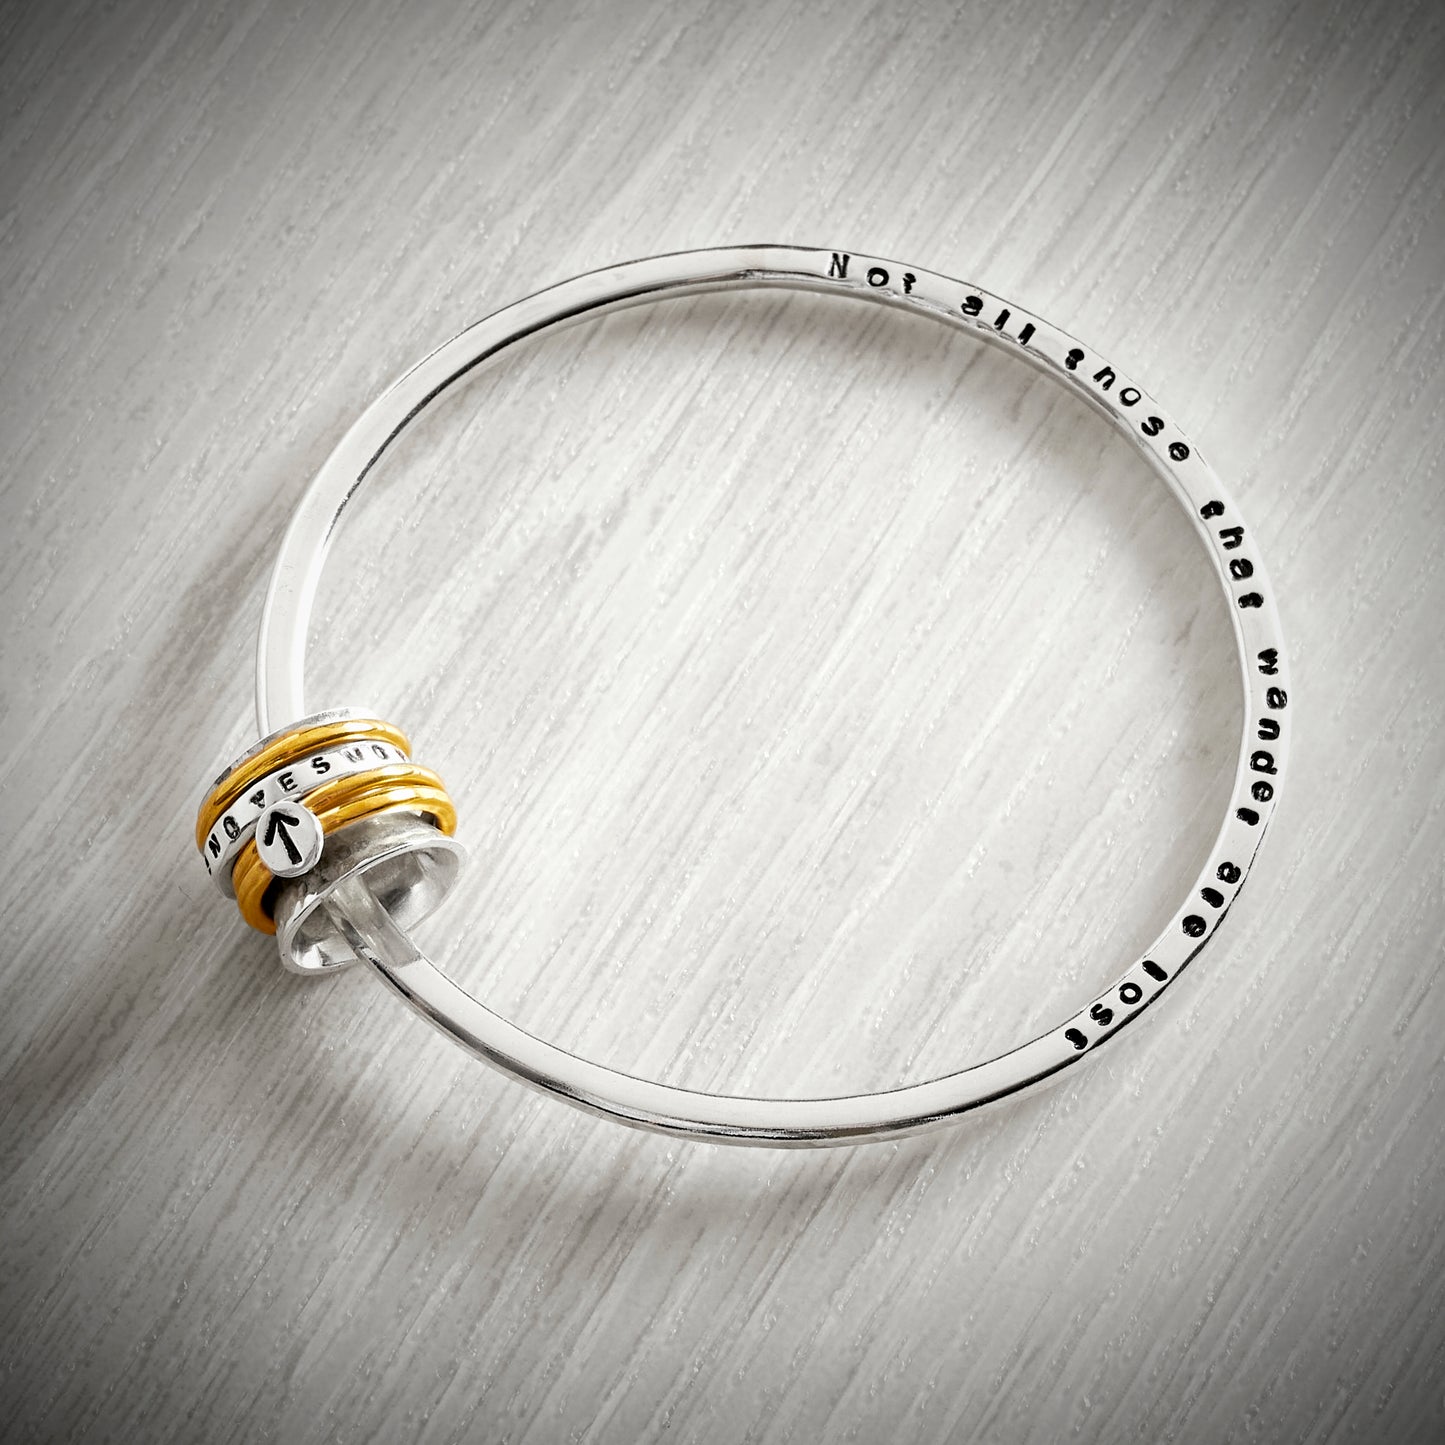 The YES/NO Spinning Bangle by Emma White